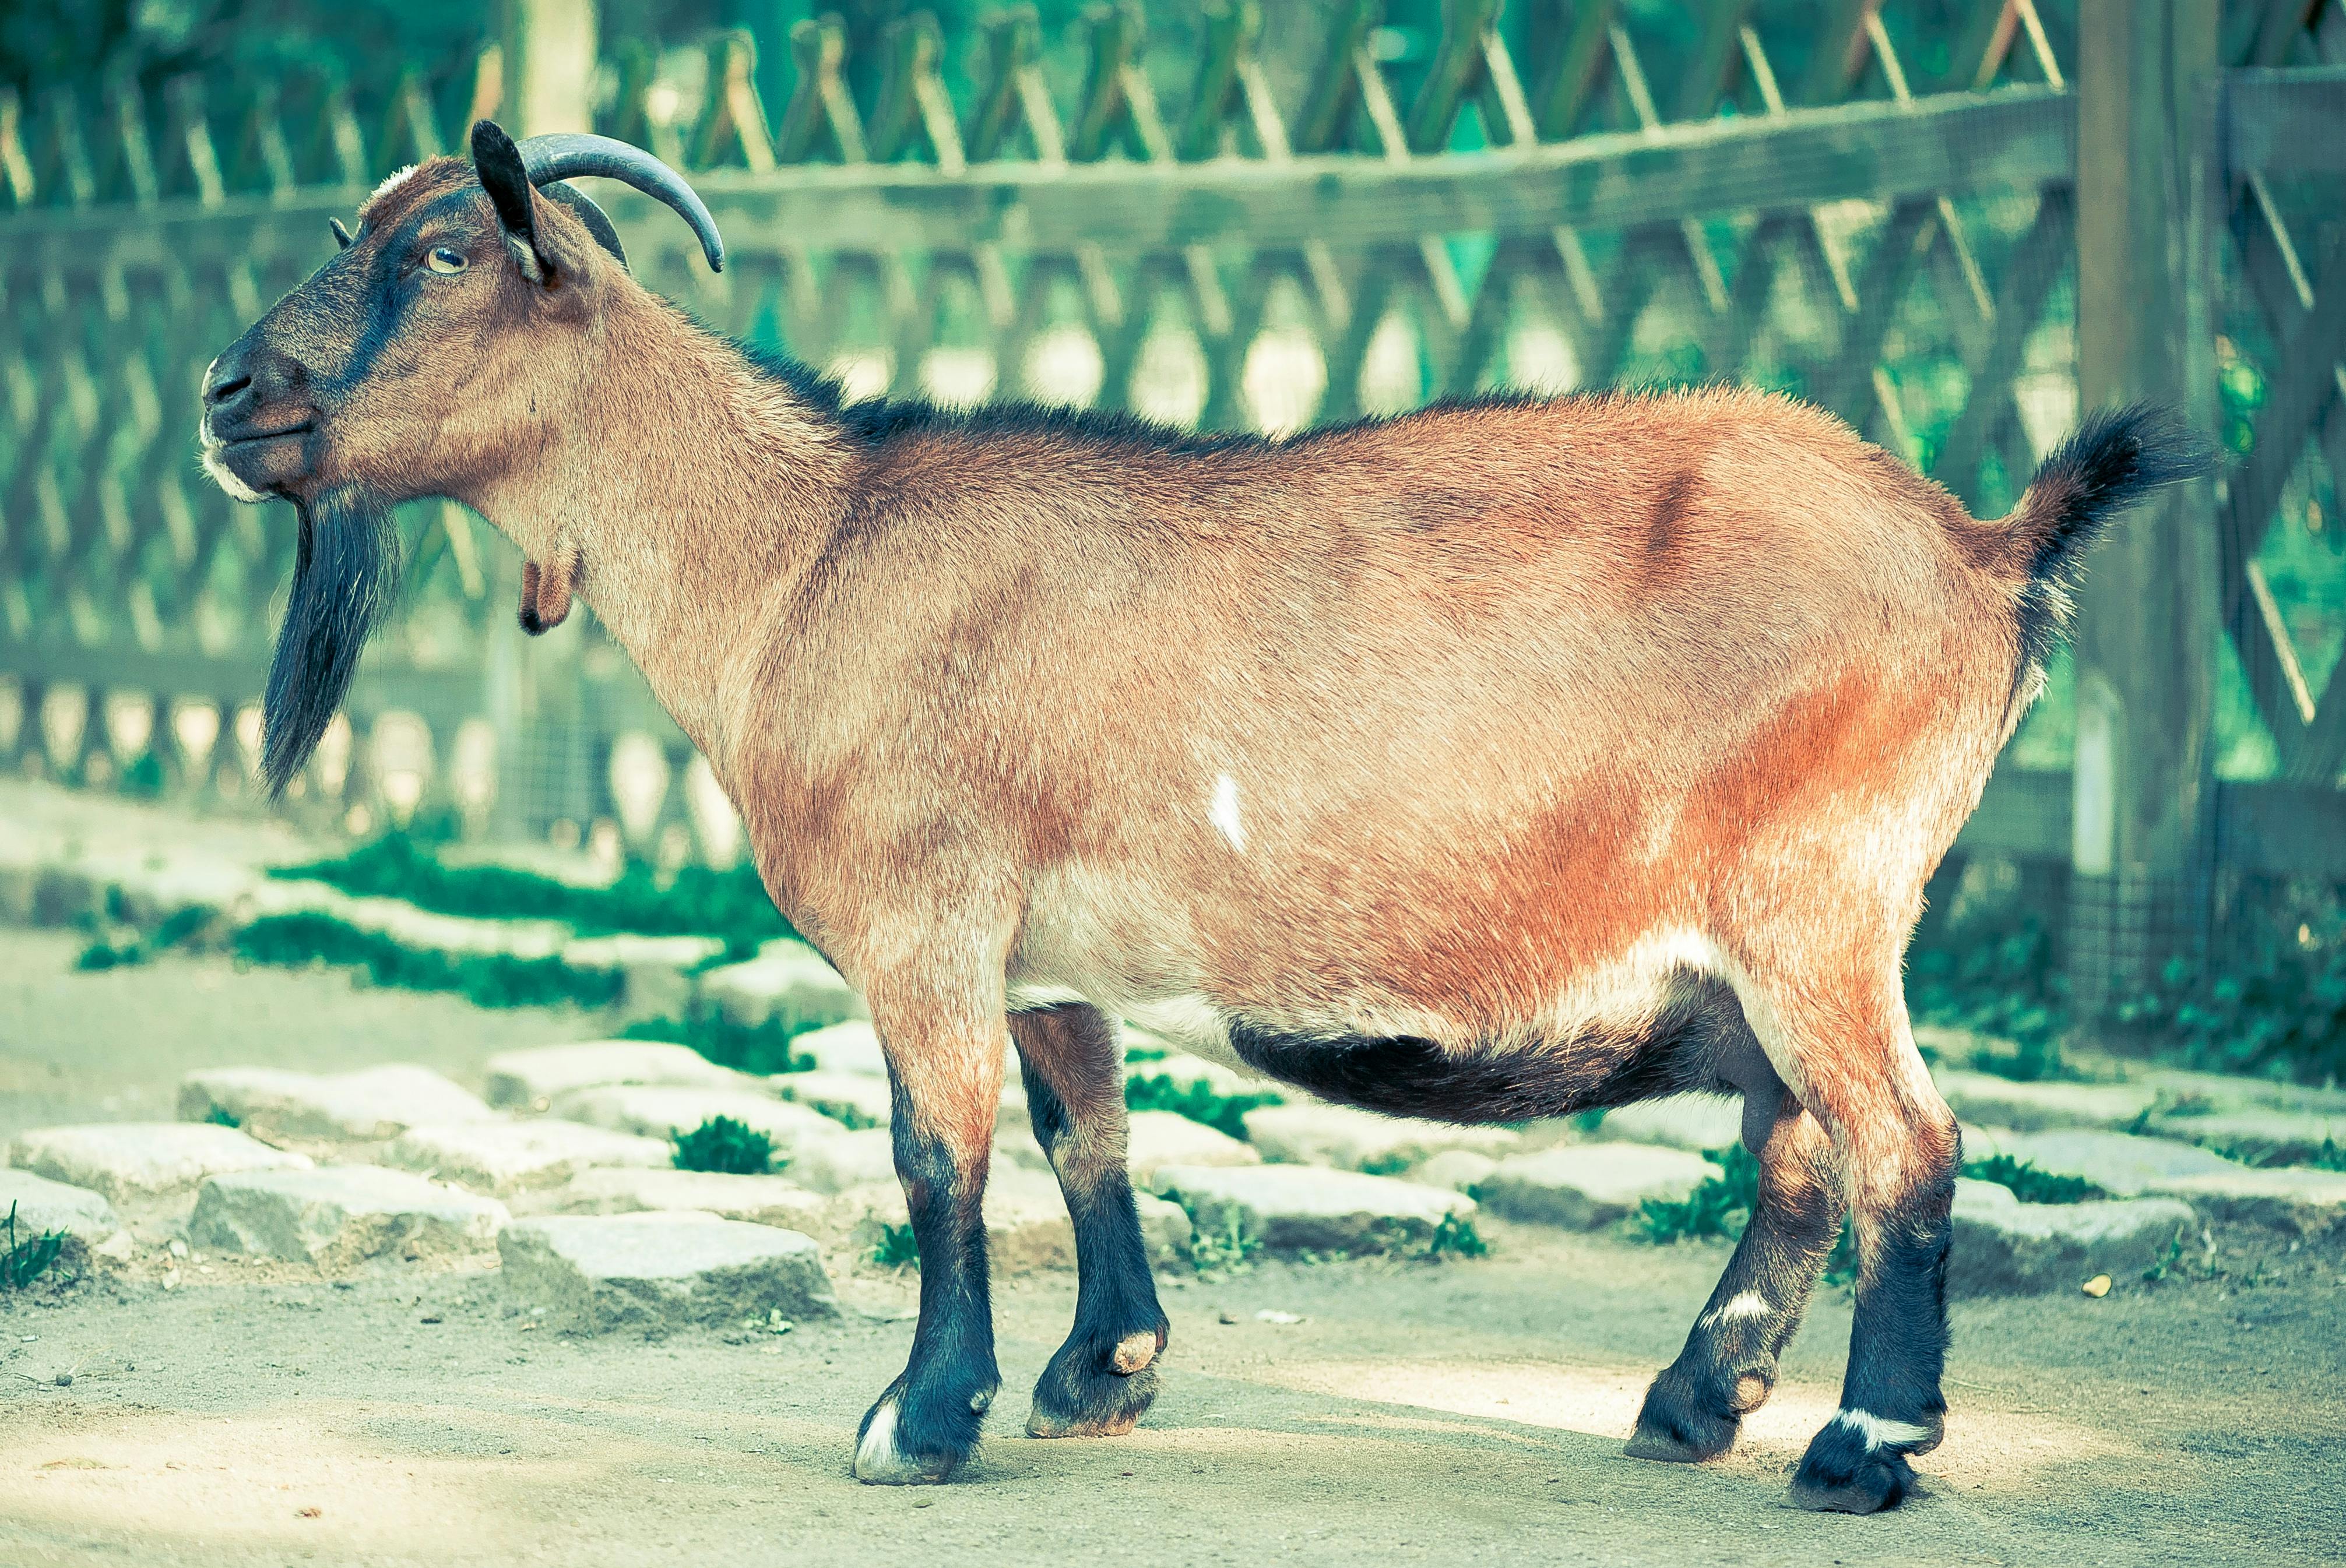 Brown and Black Goat With Horn Standing Near Fence · Free Stock Photo